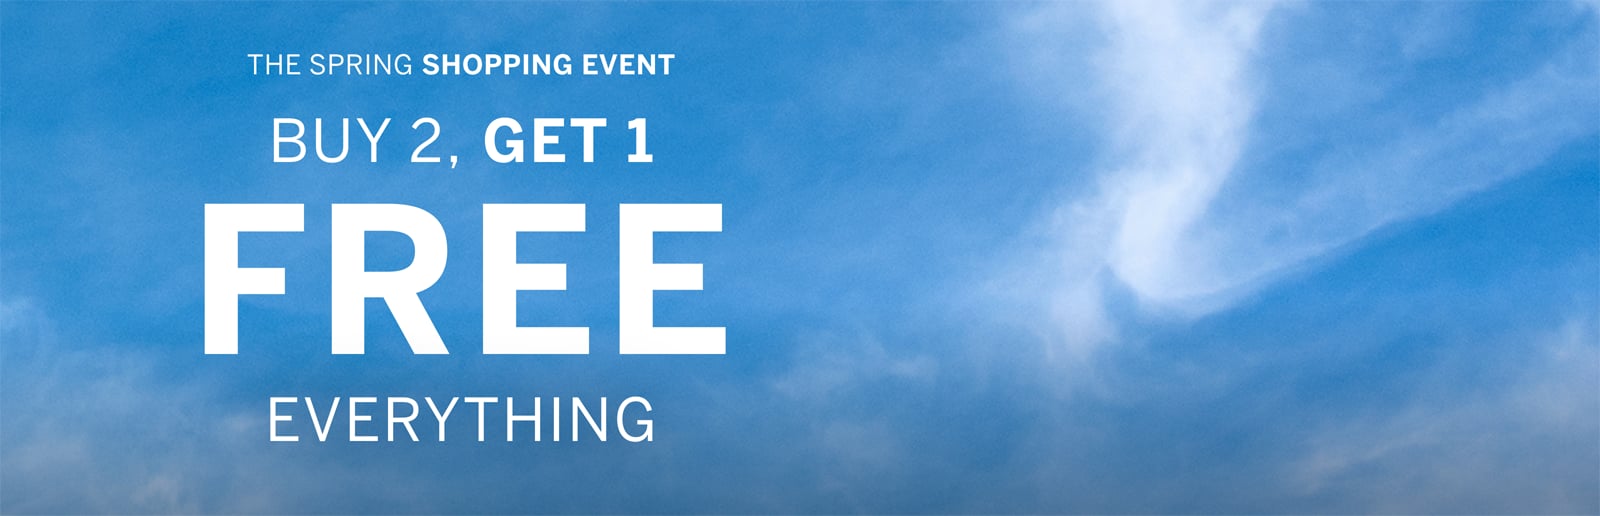 THE SPRING SHOPPING EVENT. Buy 2, Get 1 Free. Everything Limited time. Exclusions apply. Details.